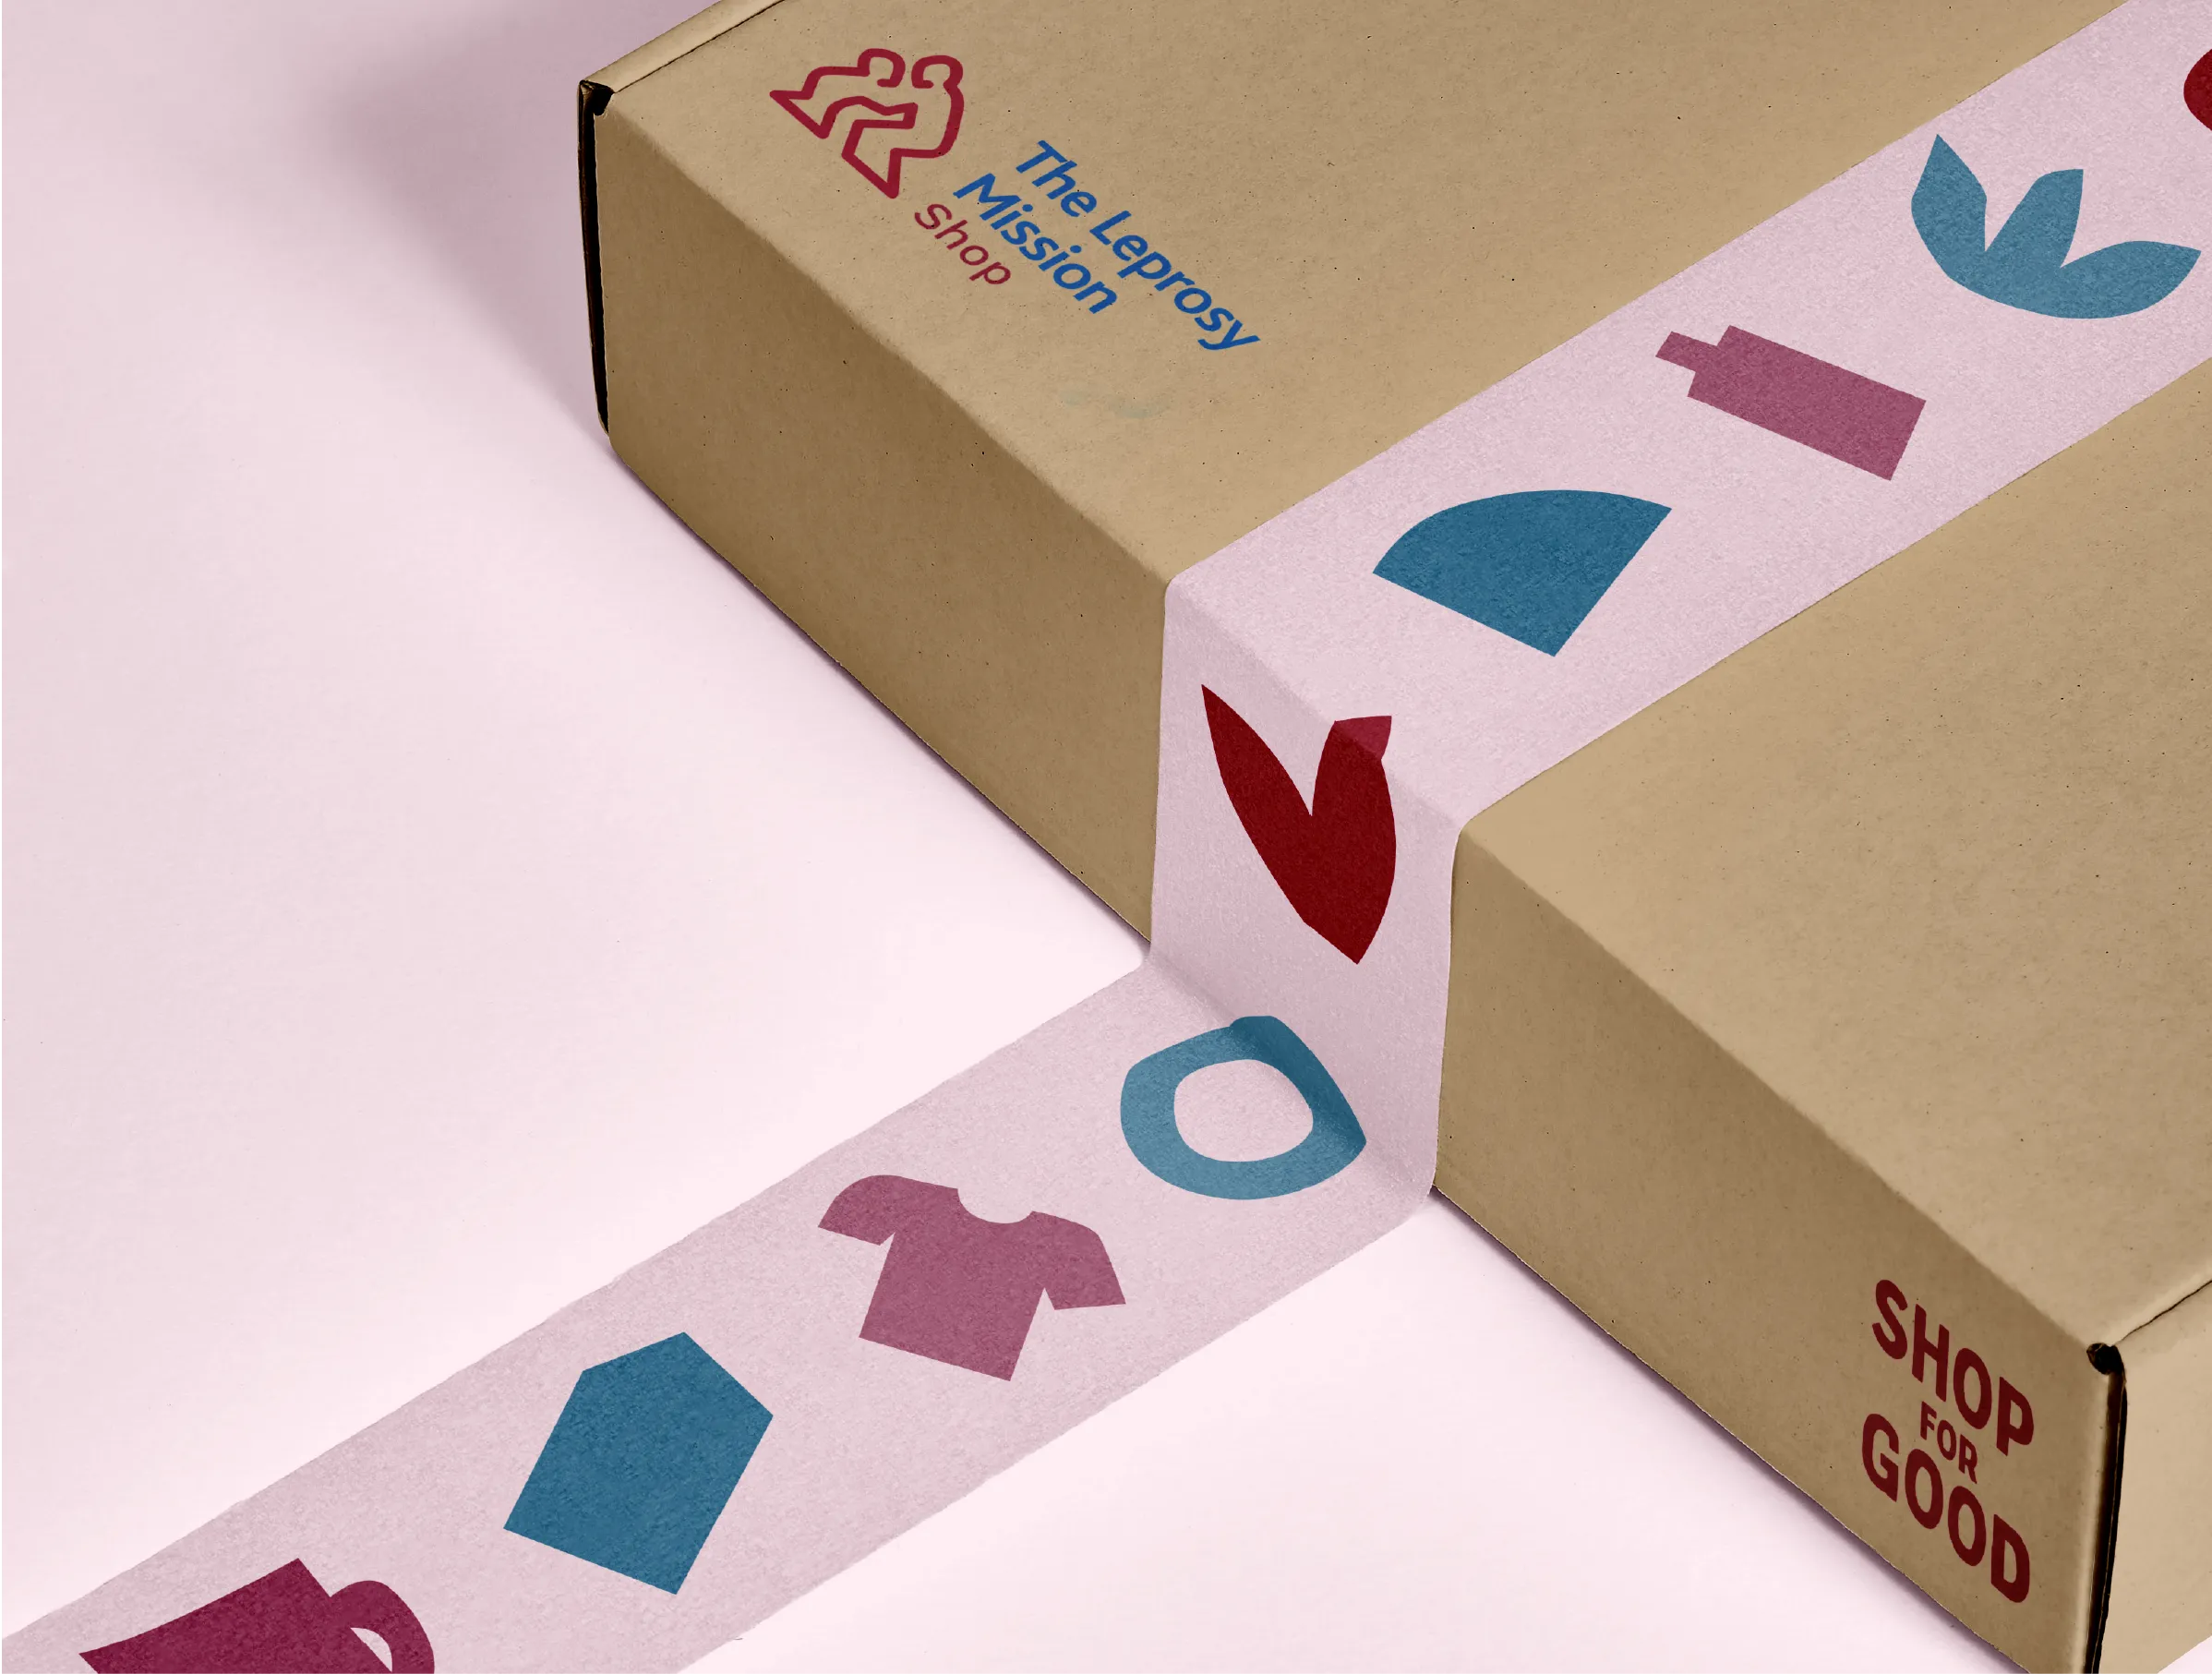 Close up of a smart brown cardboard box featuring the Leprosy Mission Shop logo, and some pink decorative parcel tape featuring some of the brand's hand cut patterns and shapes